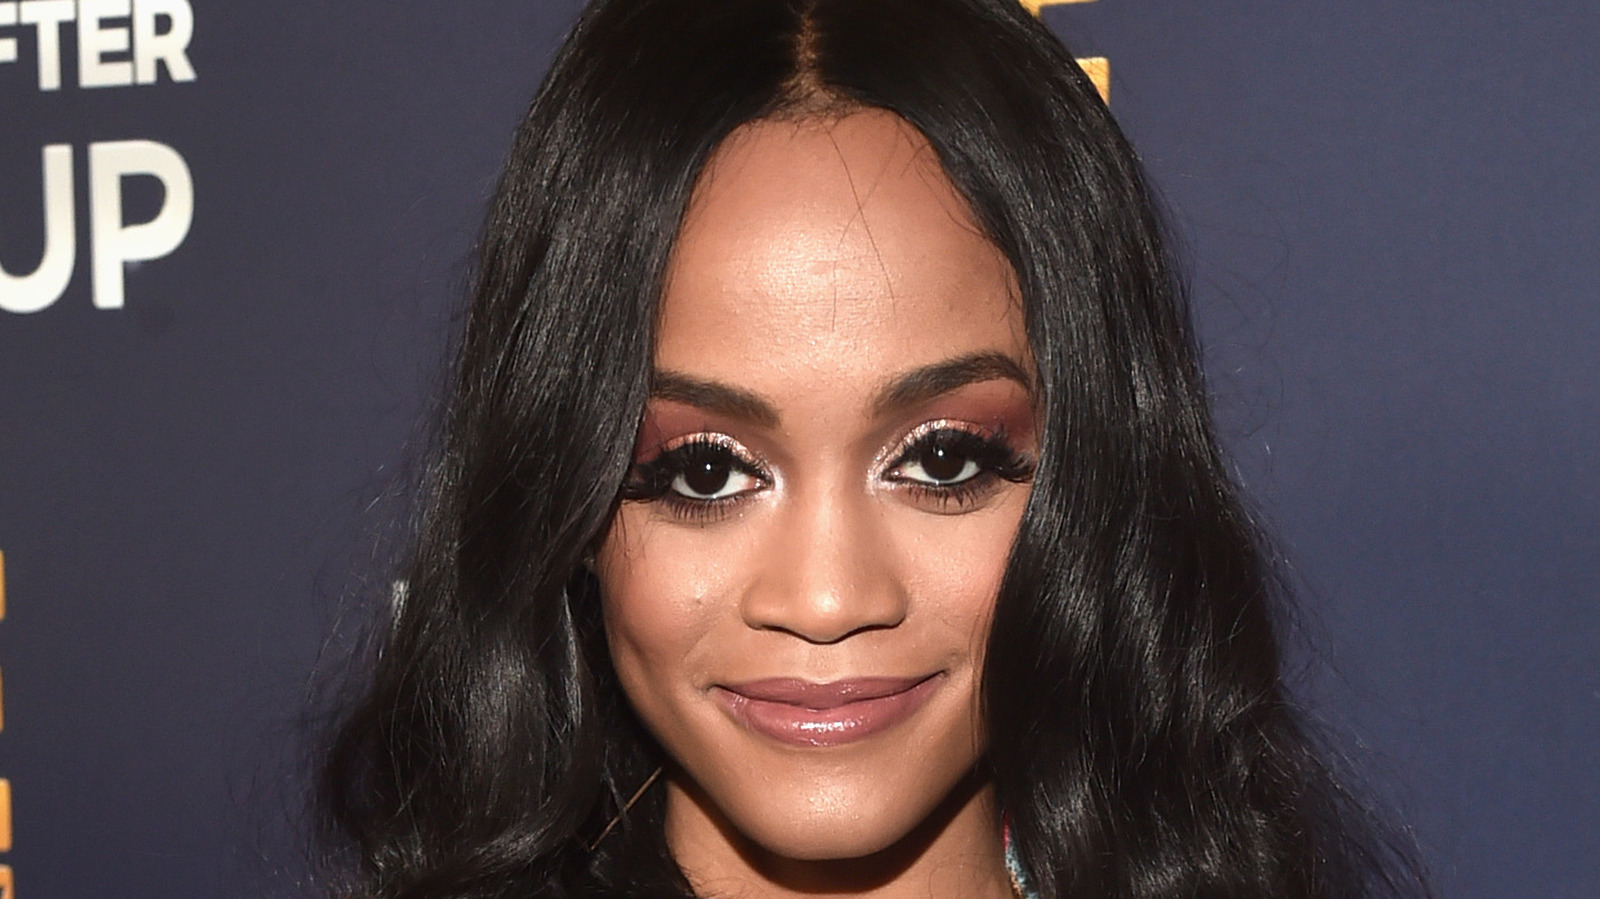 This Is How Rachel Lindsay Really Feels About Chris Harrison's Apology